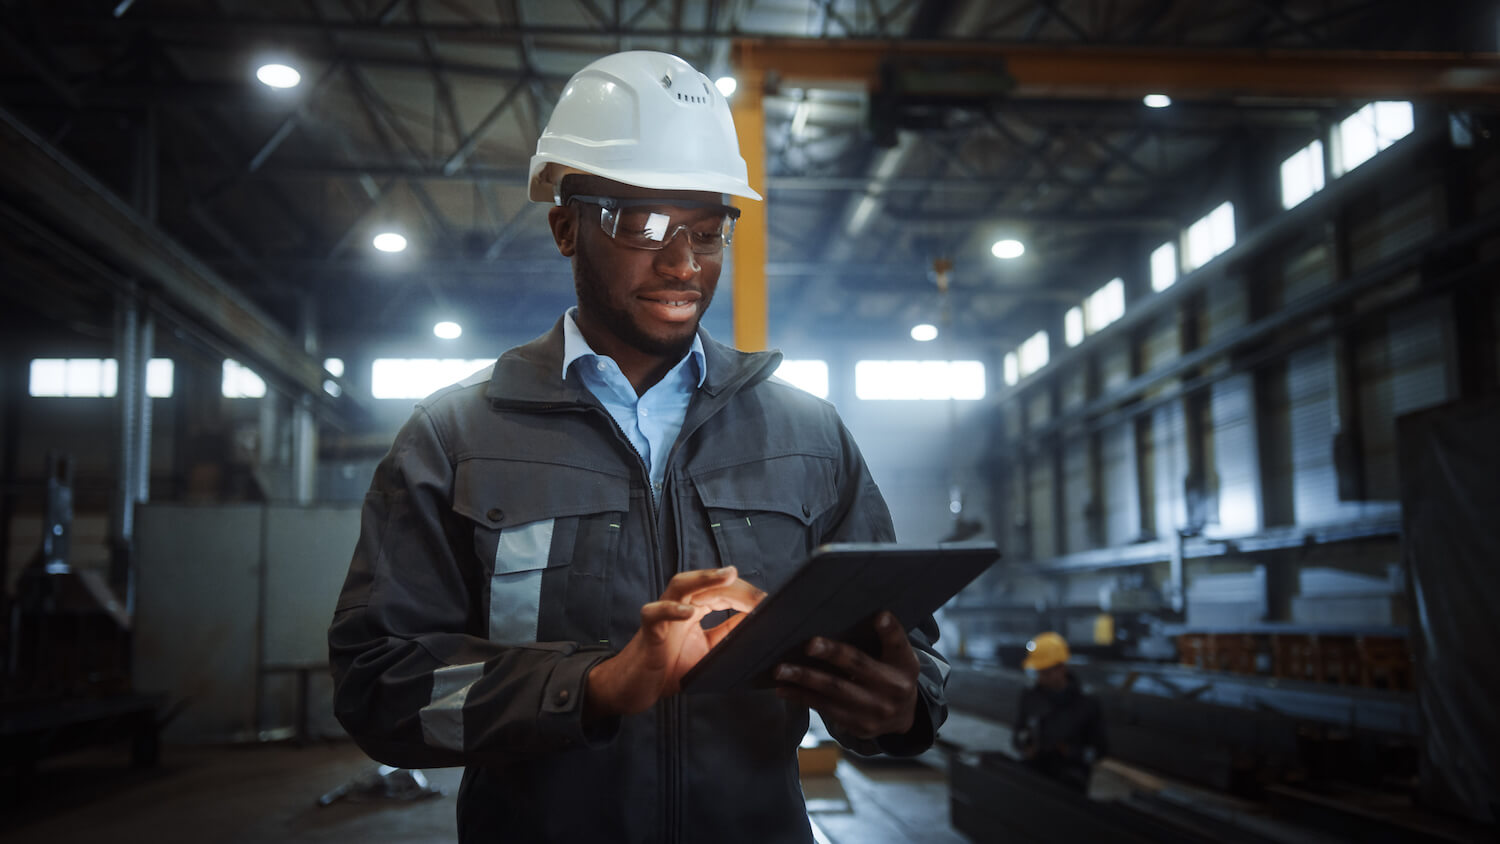 Professional Heavy Industry Engineer Worker Wearing Safety Uniform and Hard Hat Uses Tablet Computer